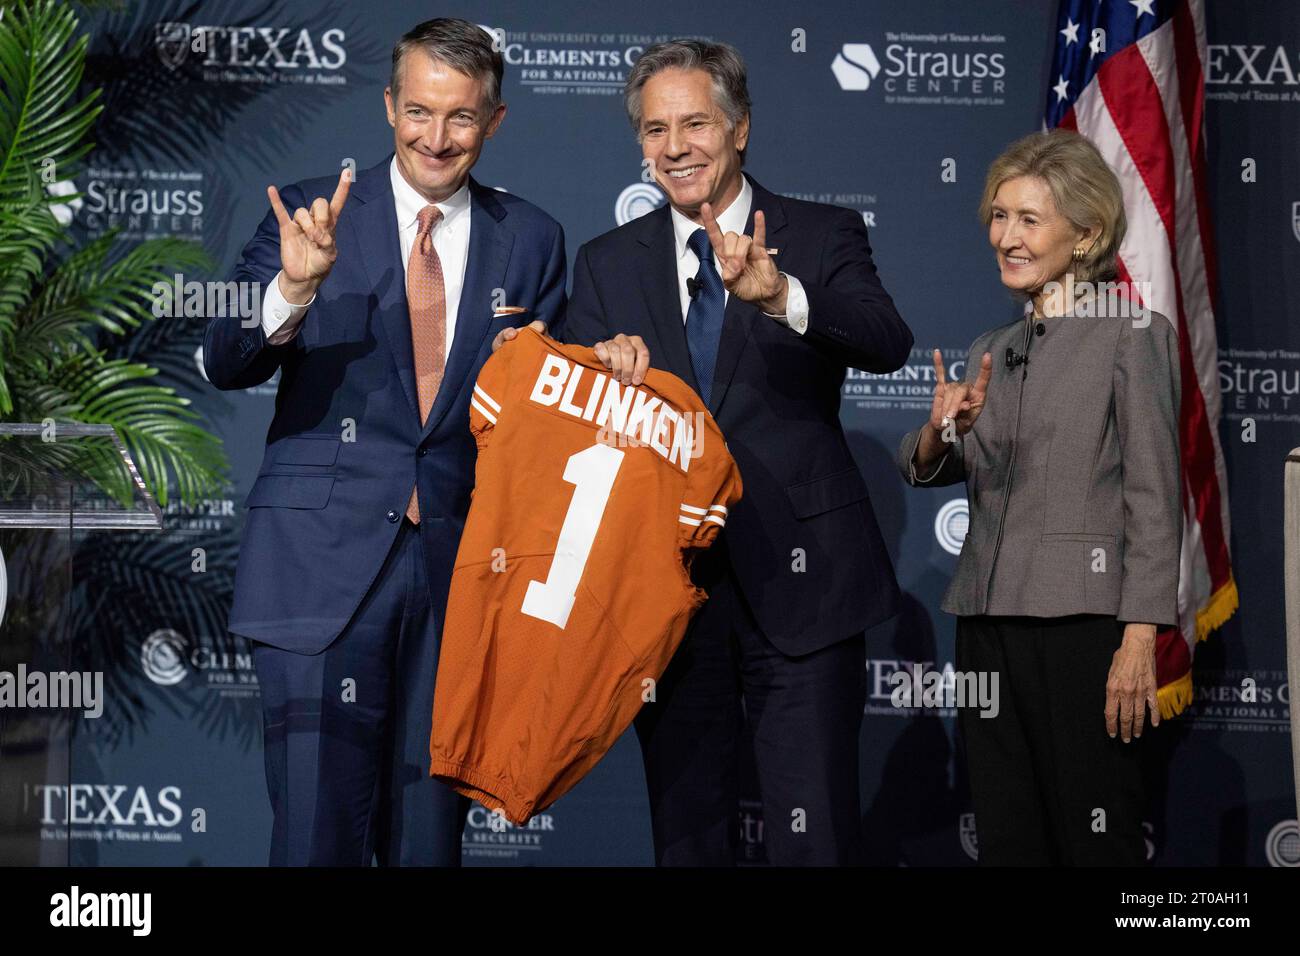 Austin Texas USA, October 4 2023: U.S. Secretary of State ANTONY BLINKEN (center) receives a football jersey from University of Texas at Austin President JAY HARTZELL (left) as KAY BAILEY HUTCHISON looks on. Blinken led a foreign policy discussion at the University of Texas' Hogg Auditorium. The three are flashing the University of Texas ''hook-em' hand signal. ©Bob Daemmrich Stock Photo